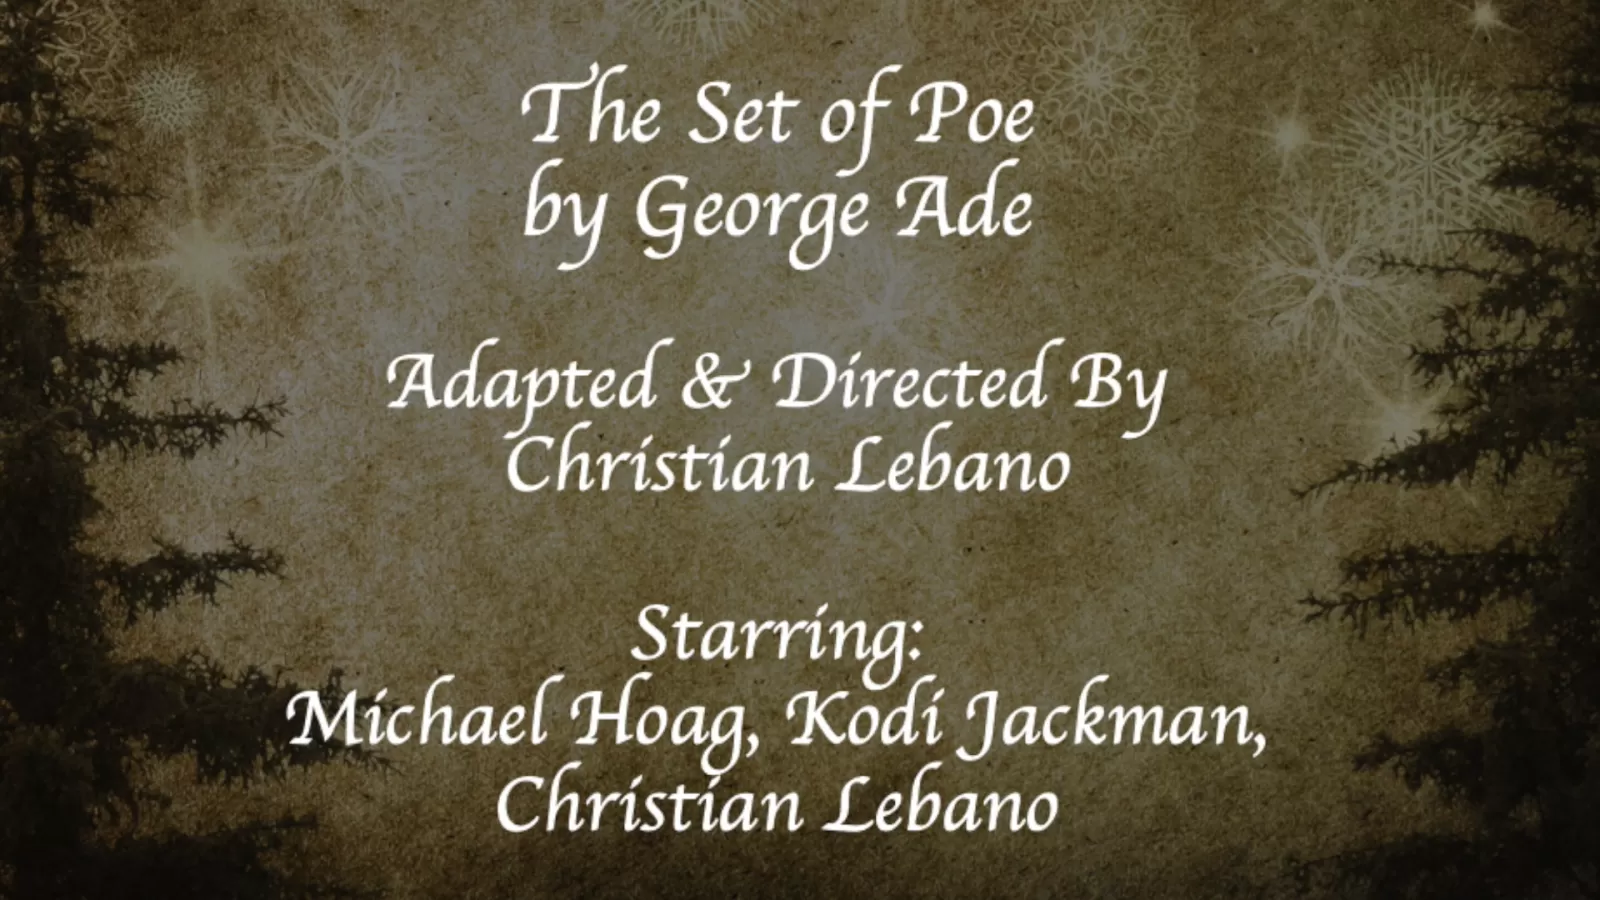 "The Set of Poe" by George Ade